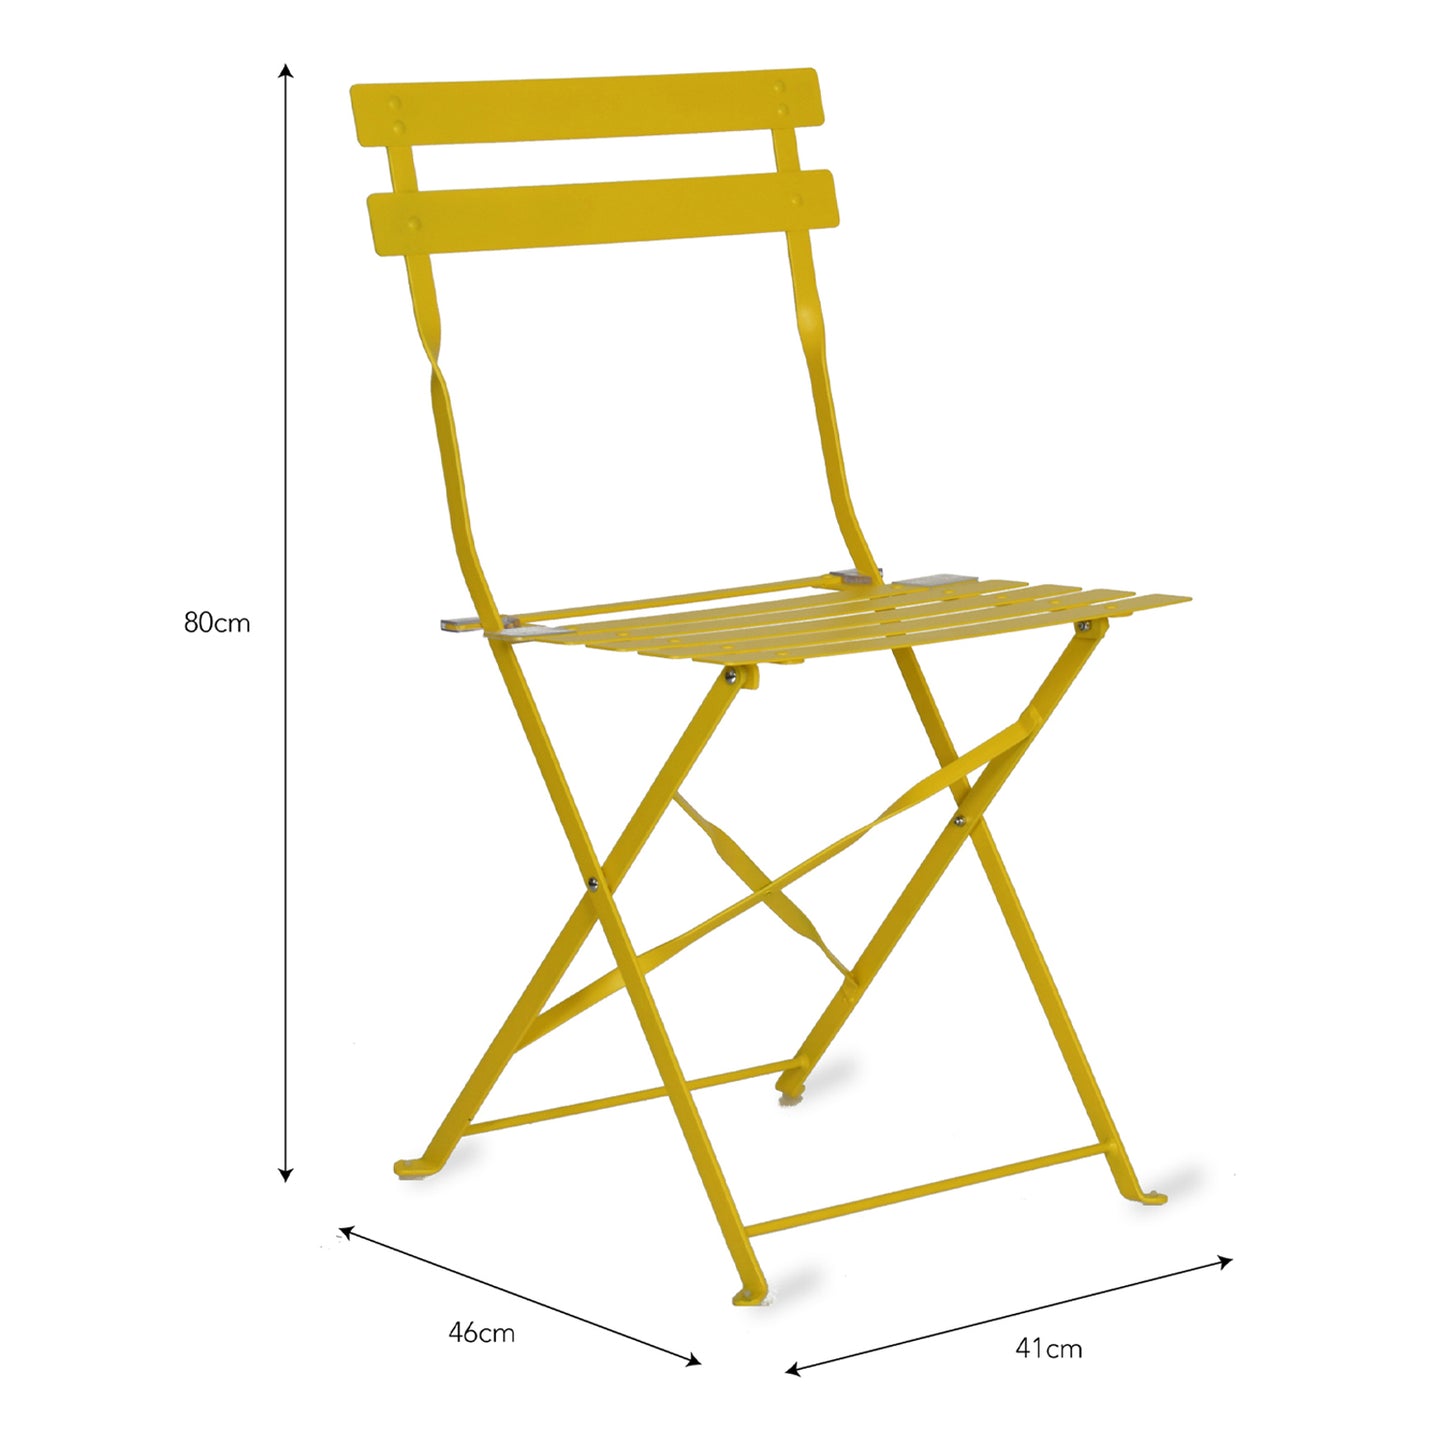 Pair of Bistro Outdoor Chairs in Lemon Steel by Garden Trading